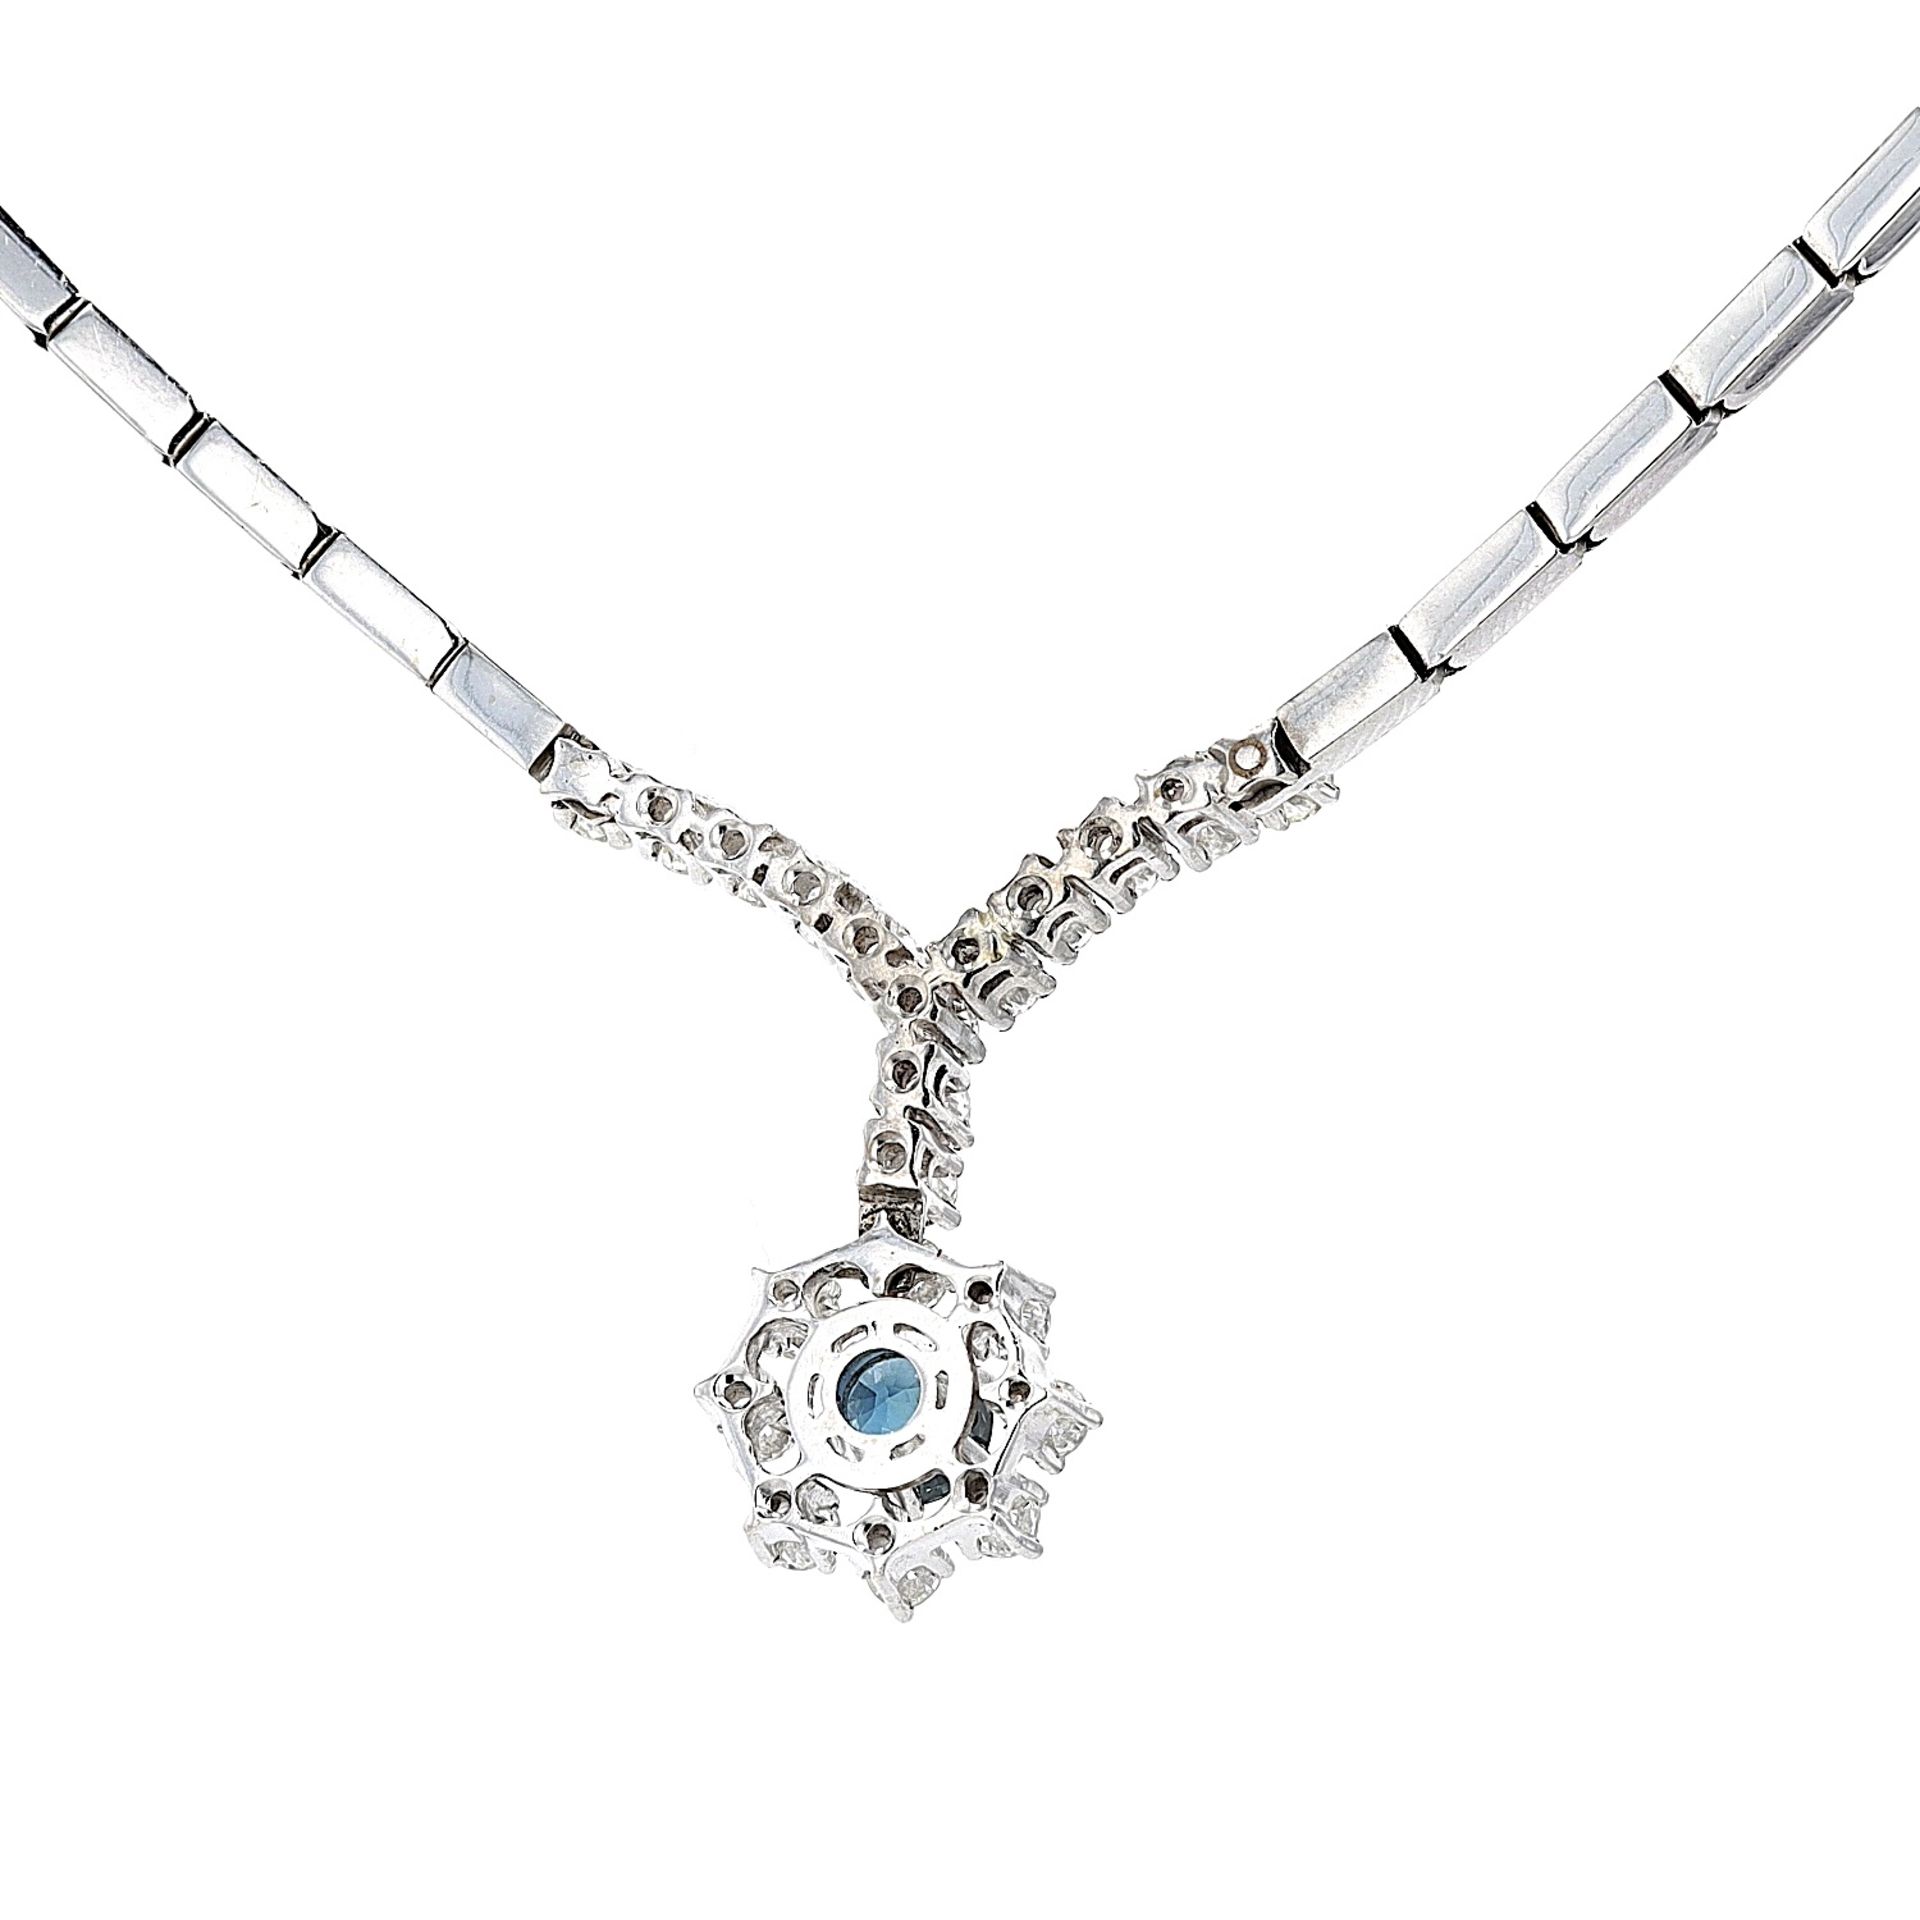 Necklace with brilliants and a sapphire - Image 4 of 6